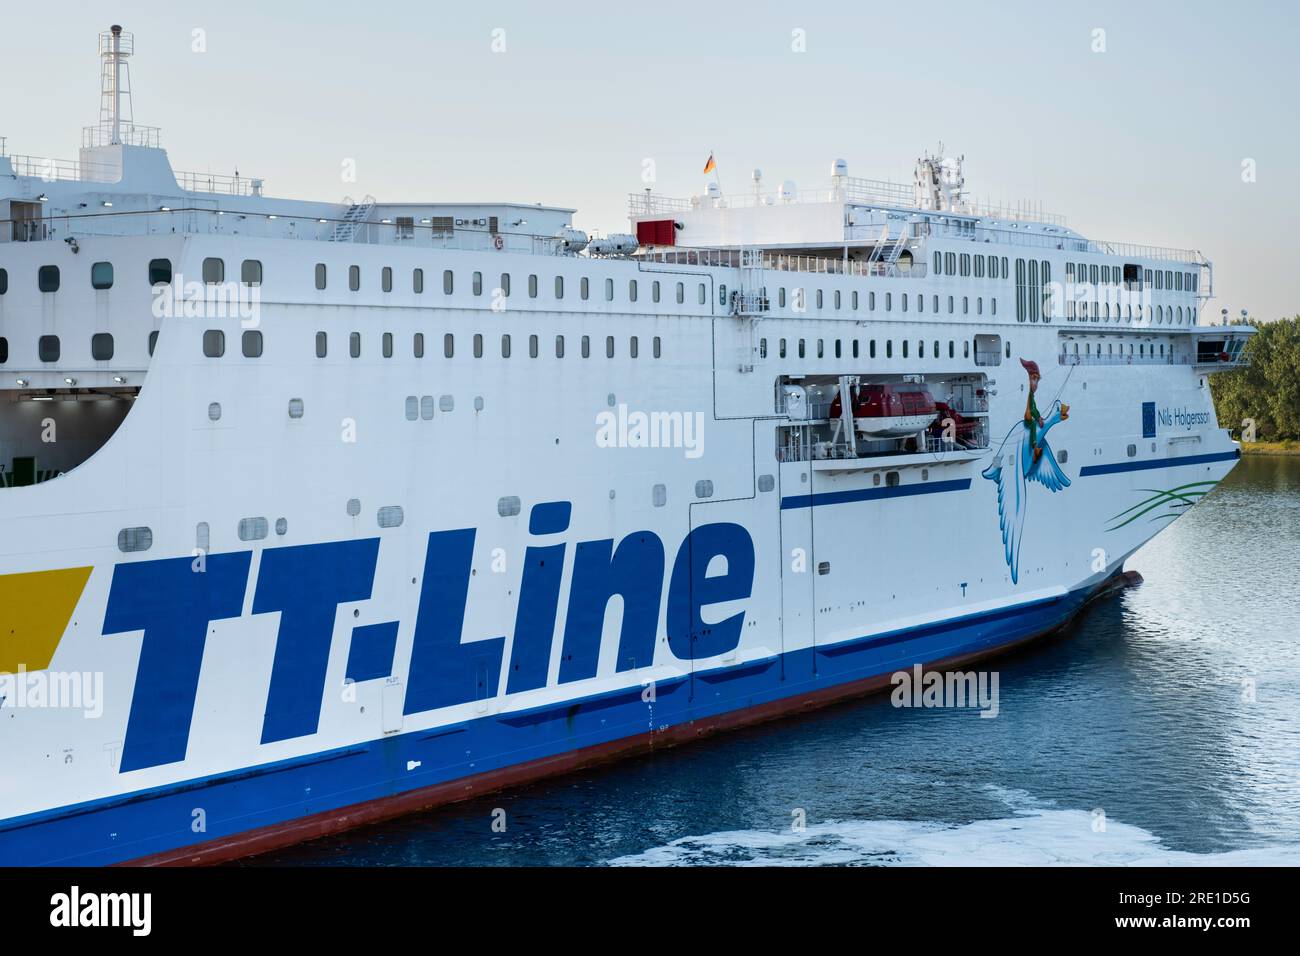 Green ship TT-Line ferry NILS HOLGERSSON, LNG Powered with image of Nils Holgersson on a flying goose Stock Photo